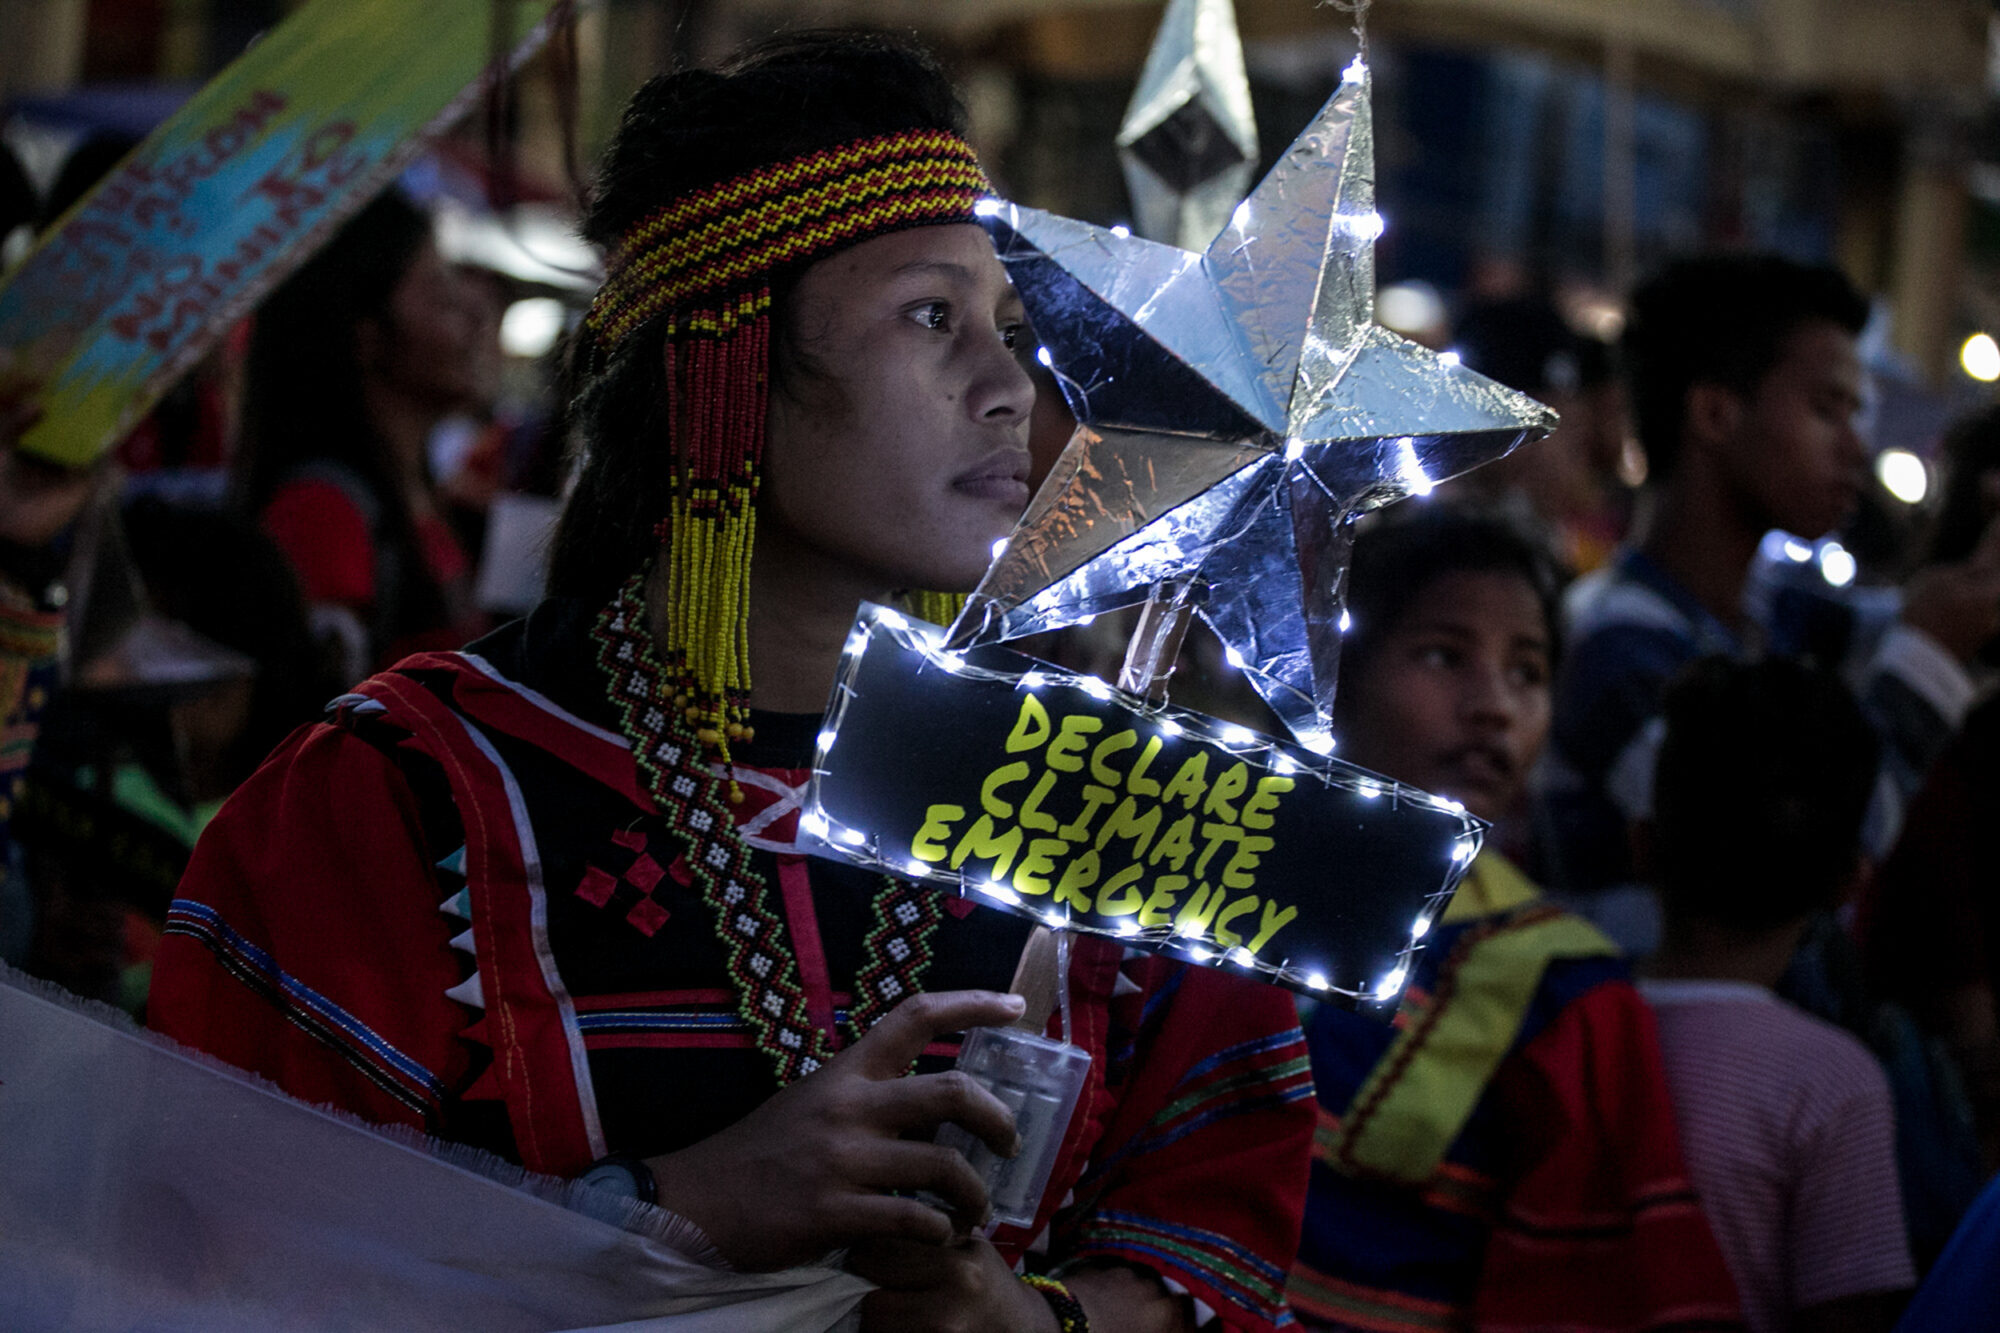 A climate activist carrying a placard in the shape of a star, with fairy lights around it, and sign reading "Declare Climate Emergency".